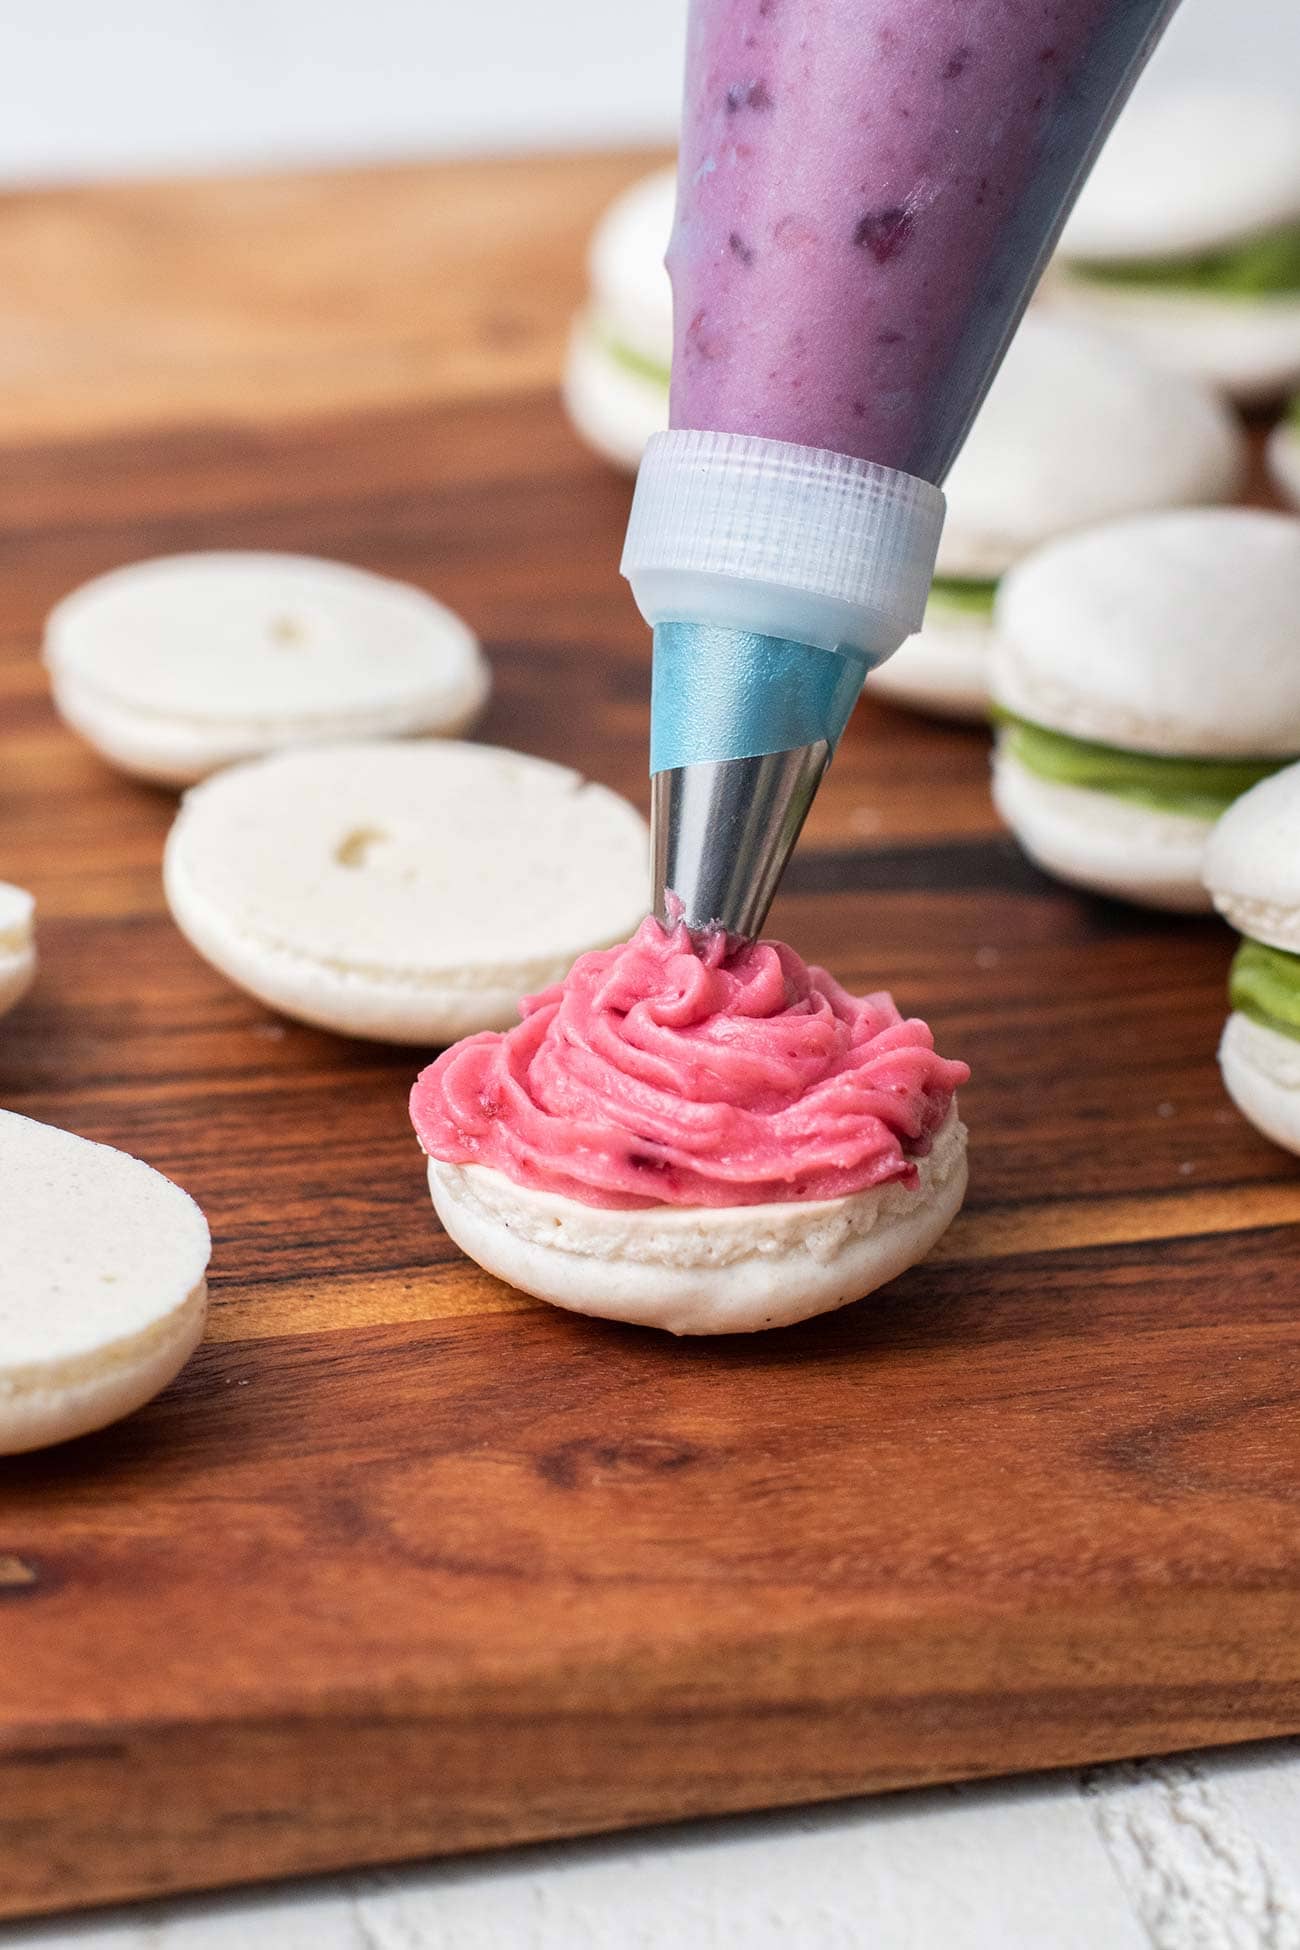 raspberry buttercream being piped onto a macaron shell.